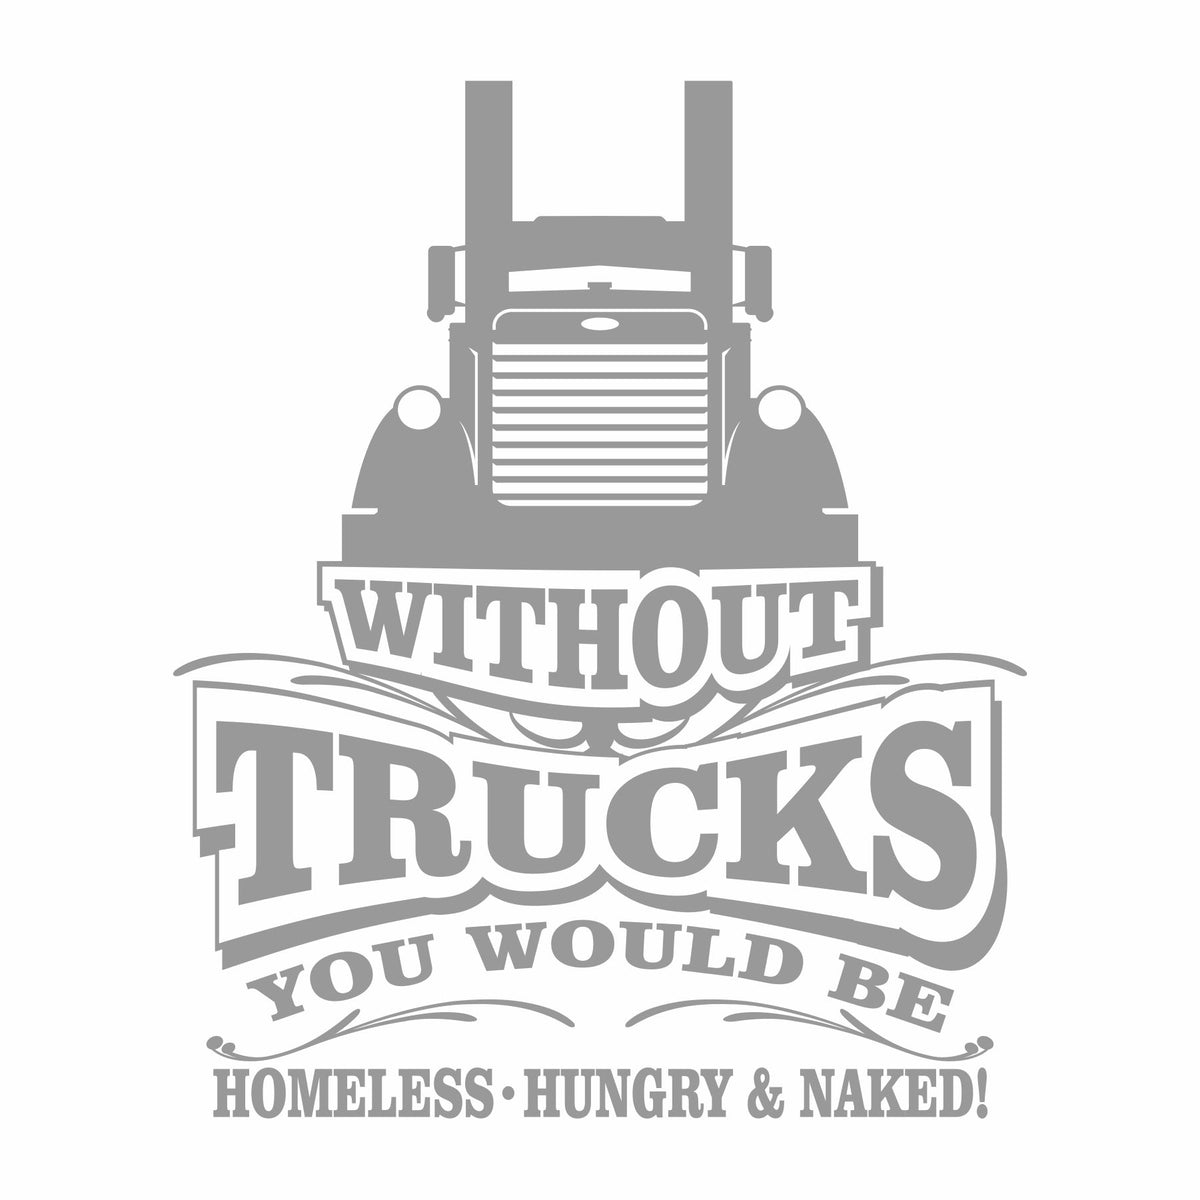 Without Trucks You Would Be Pete - Vinyl Decal - Free Shipping